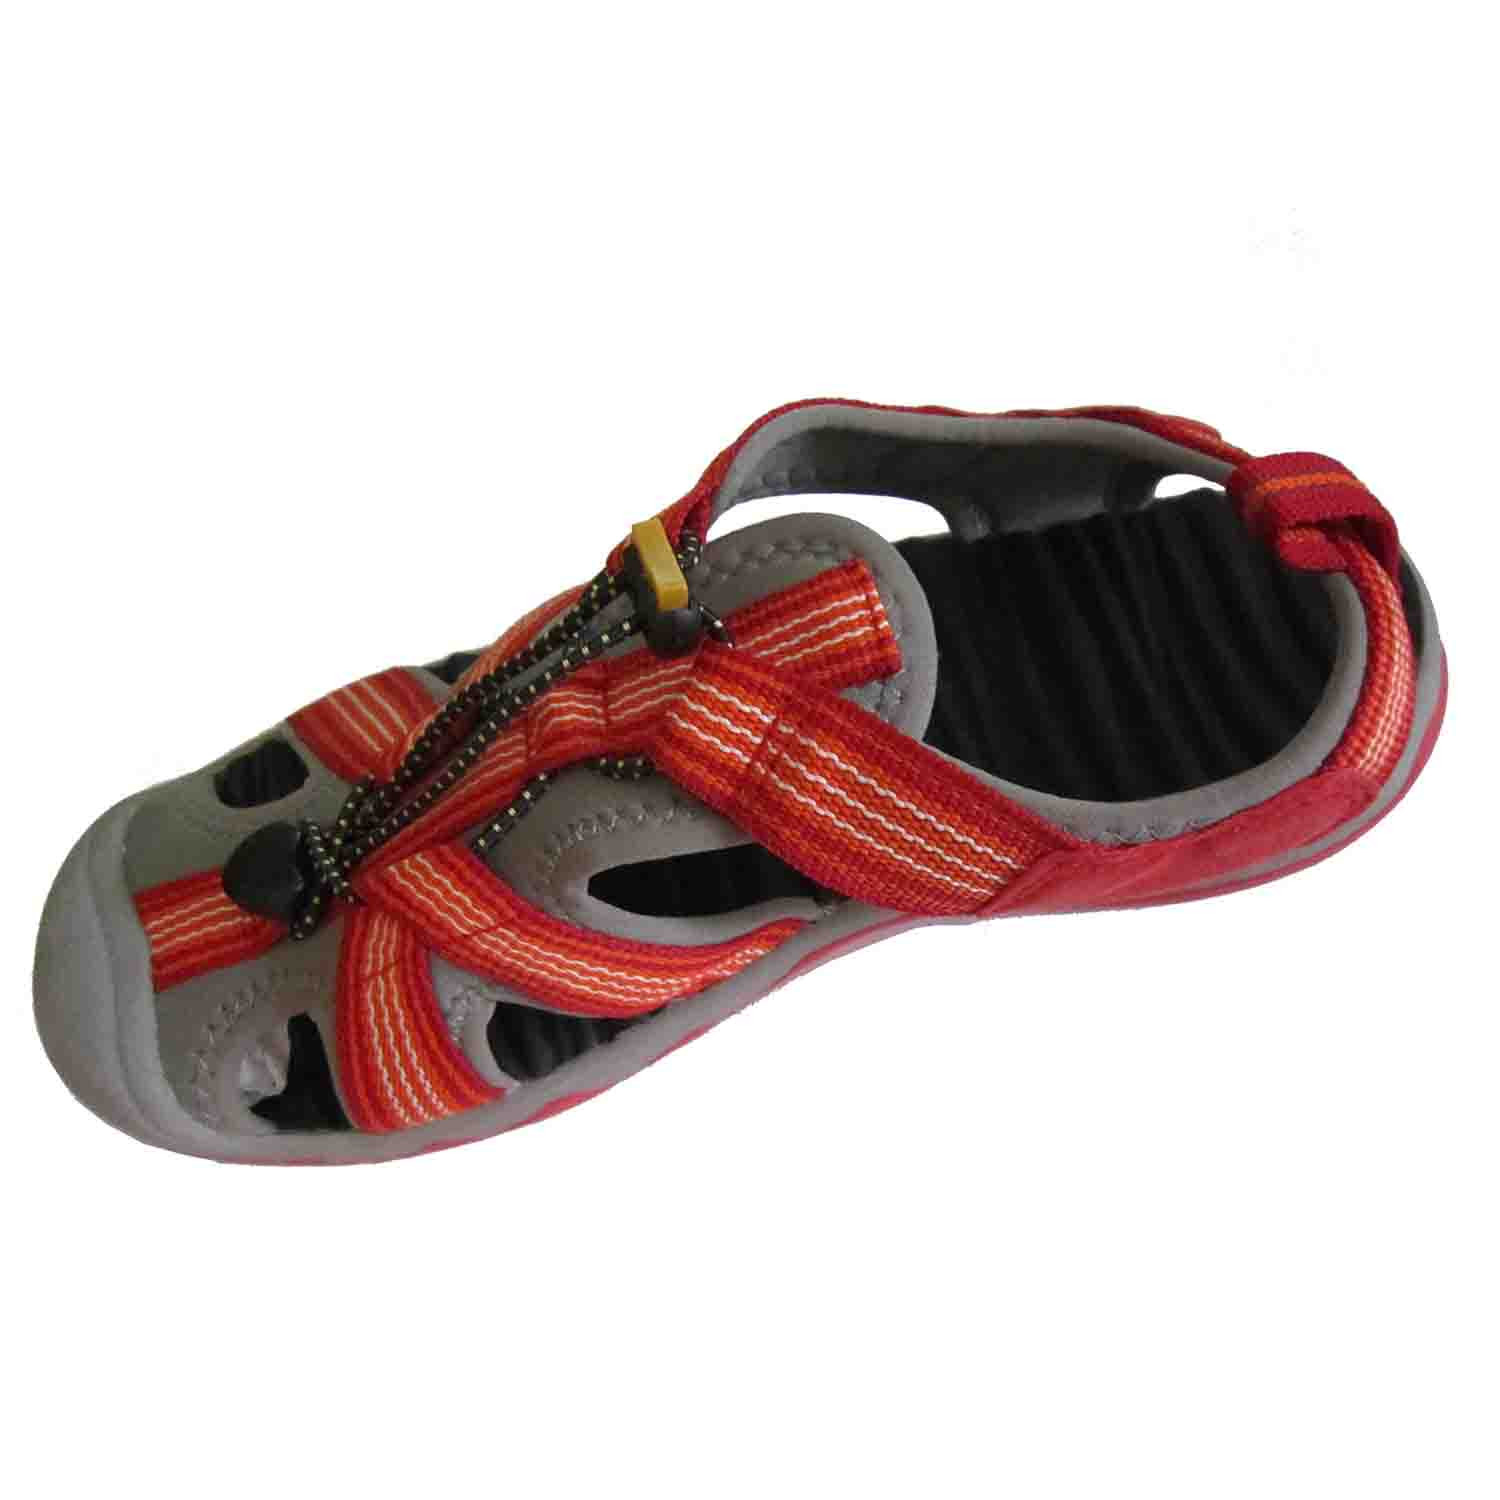 Six.Ten Outdoor Hiking Sport Sandals Closed Toe Water Shoes